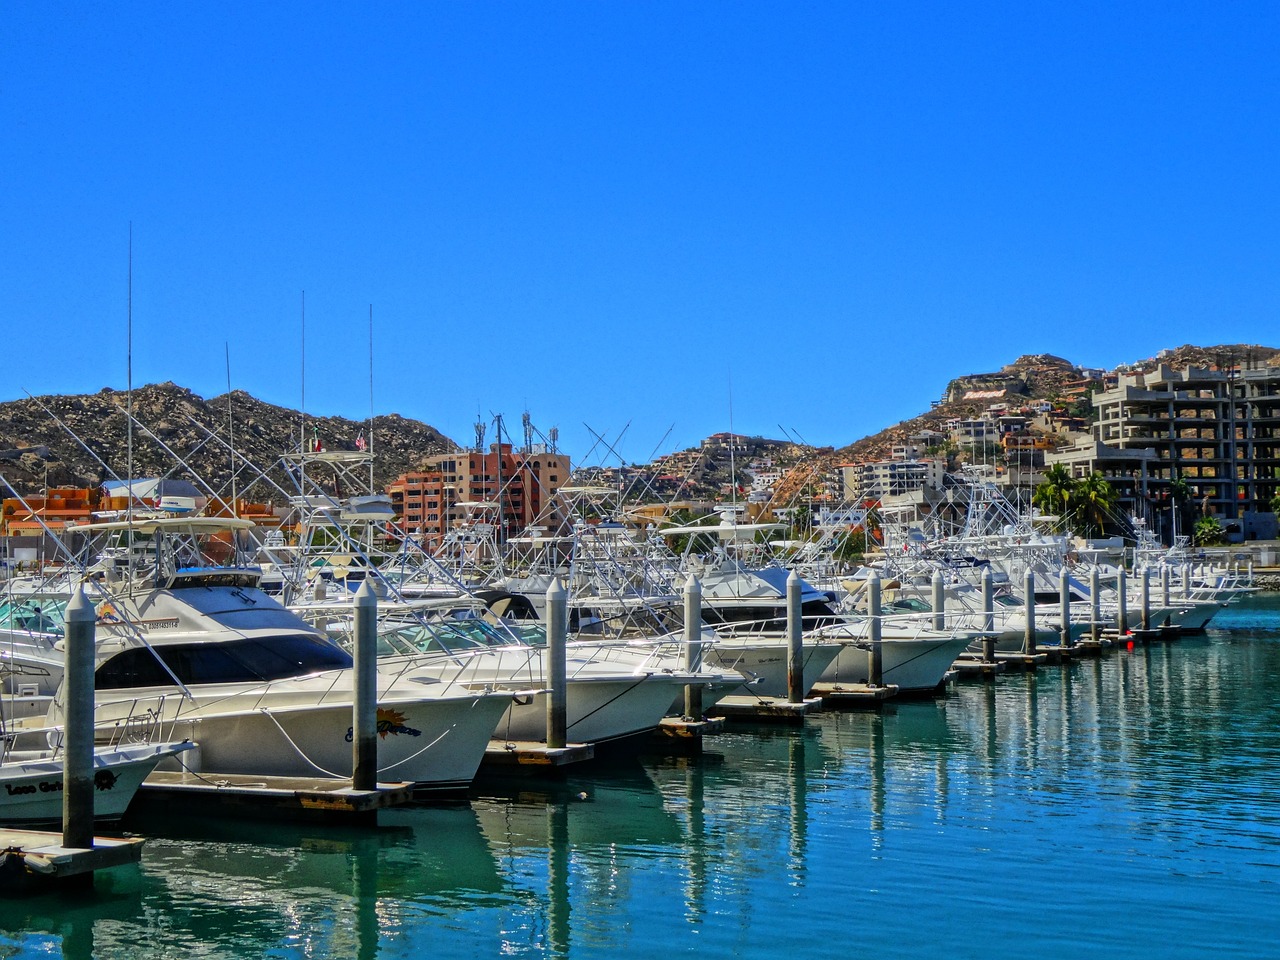 Boats lined up on the marina in Cabo San Lucas